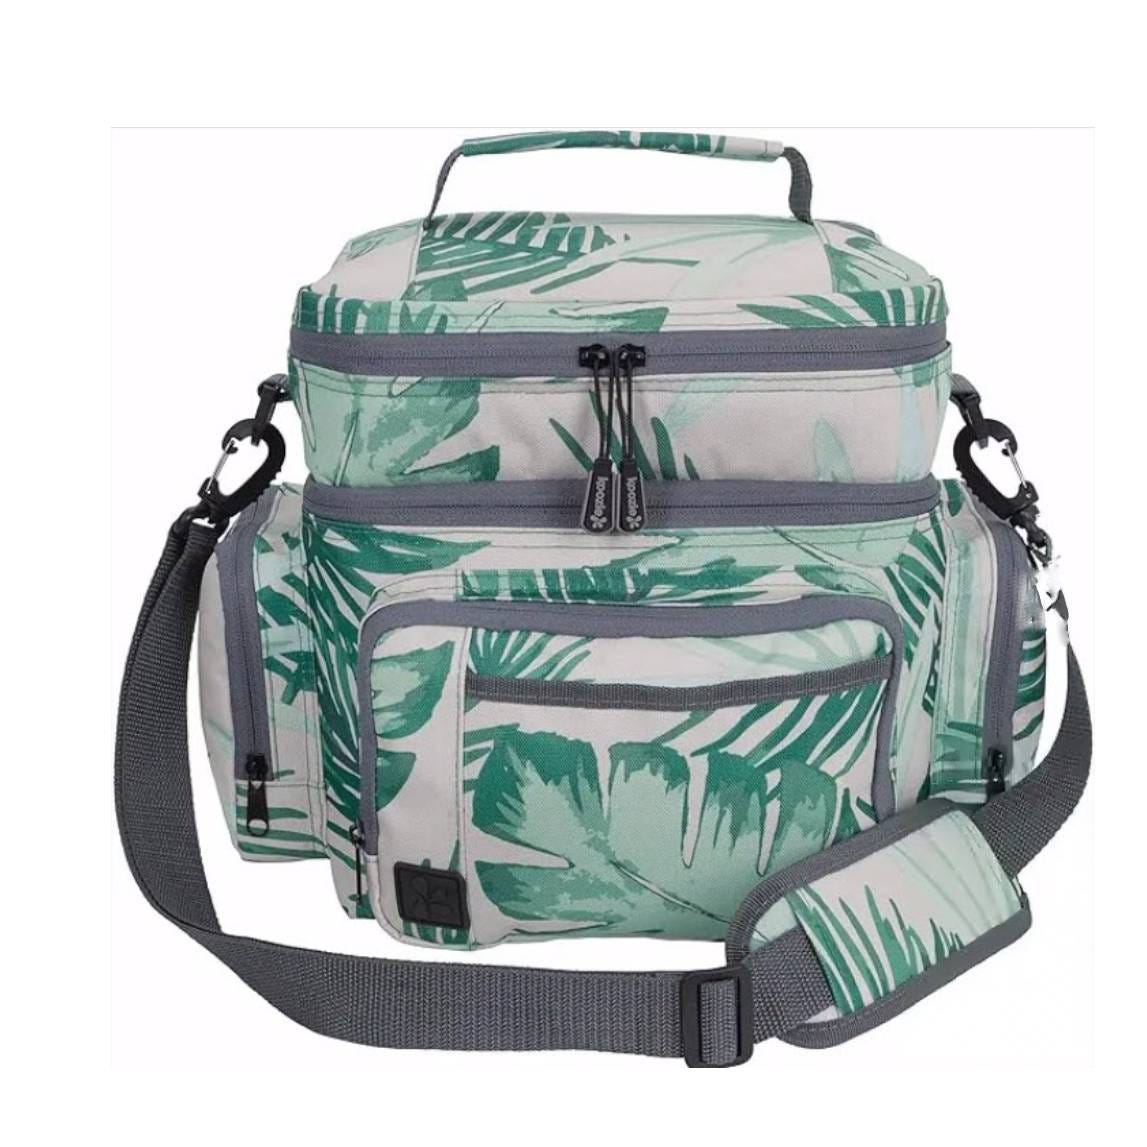 A soft cooler with a shoulder strap and green tropical leaf pattern design, featuring multiple compartments and zippers.